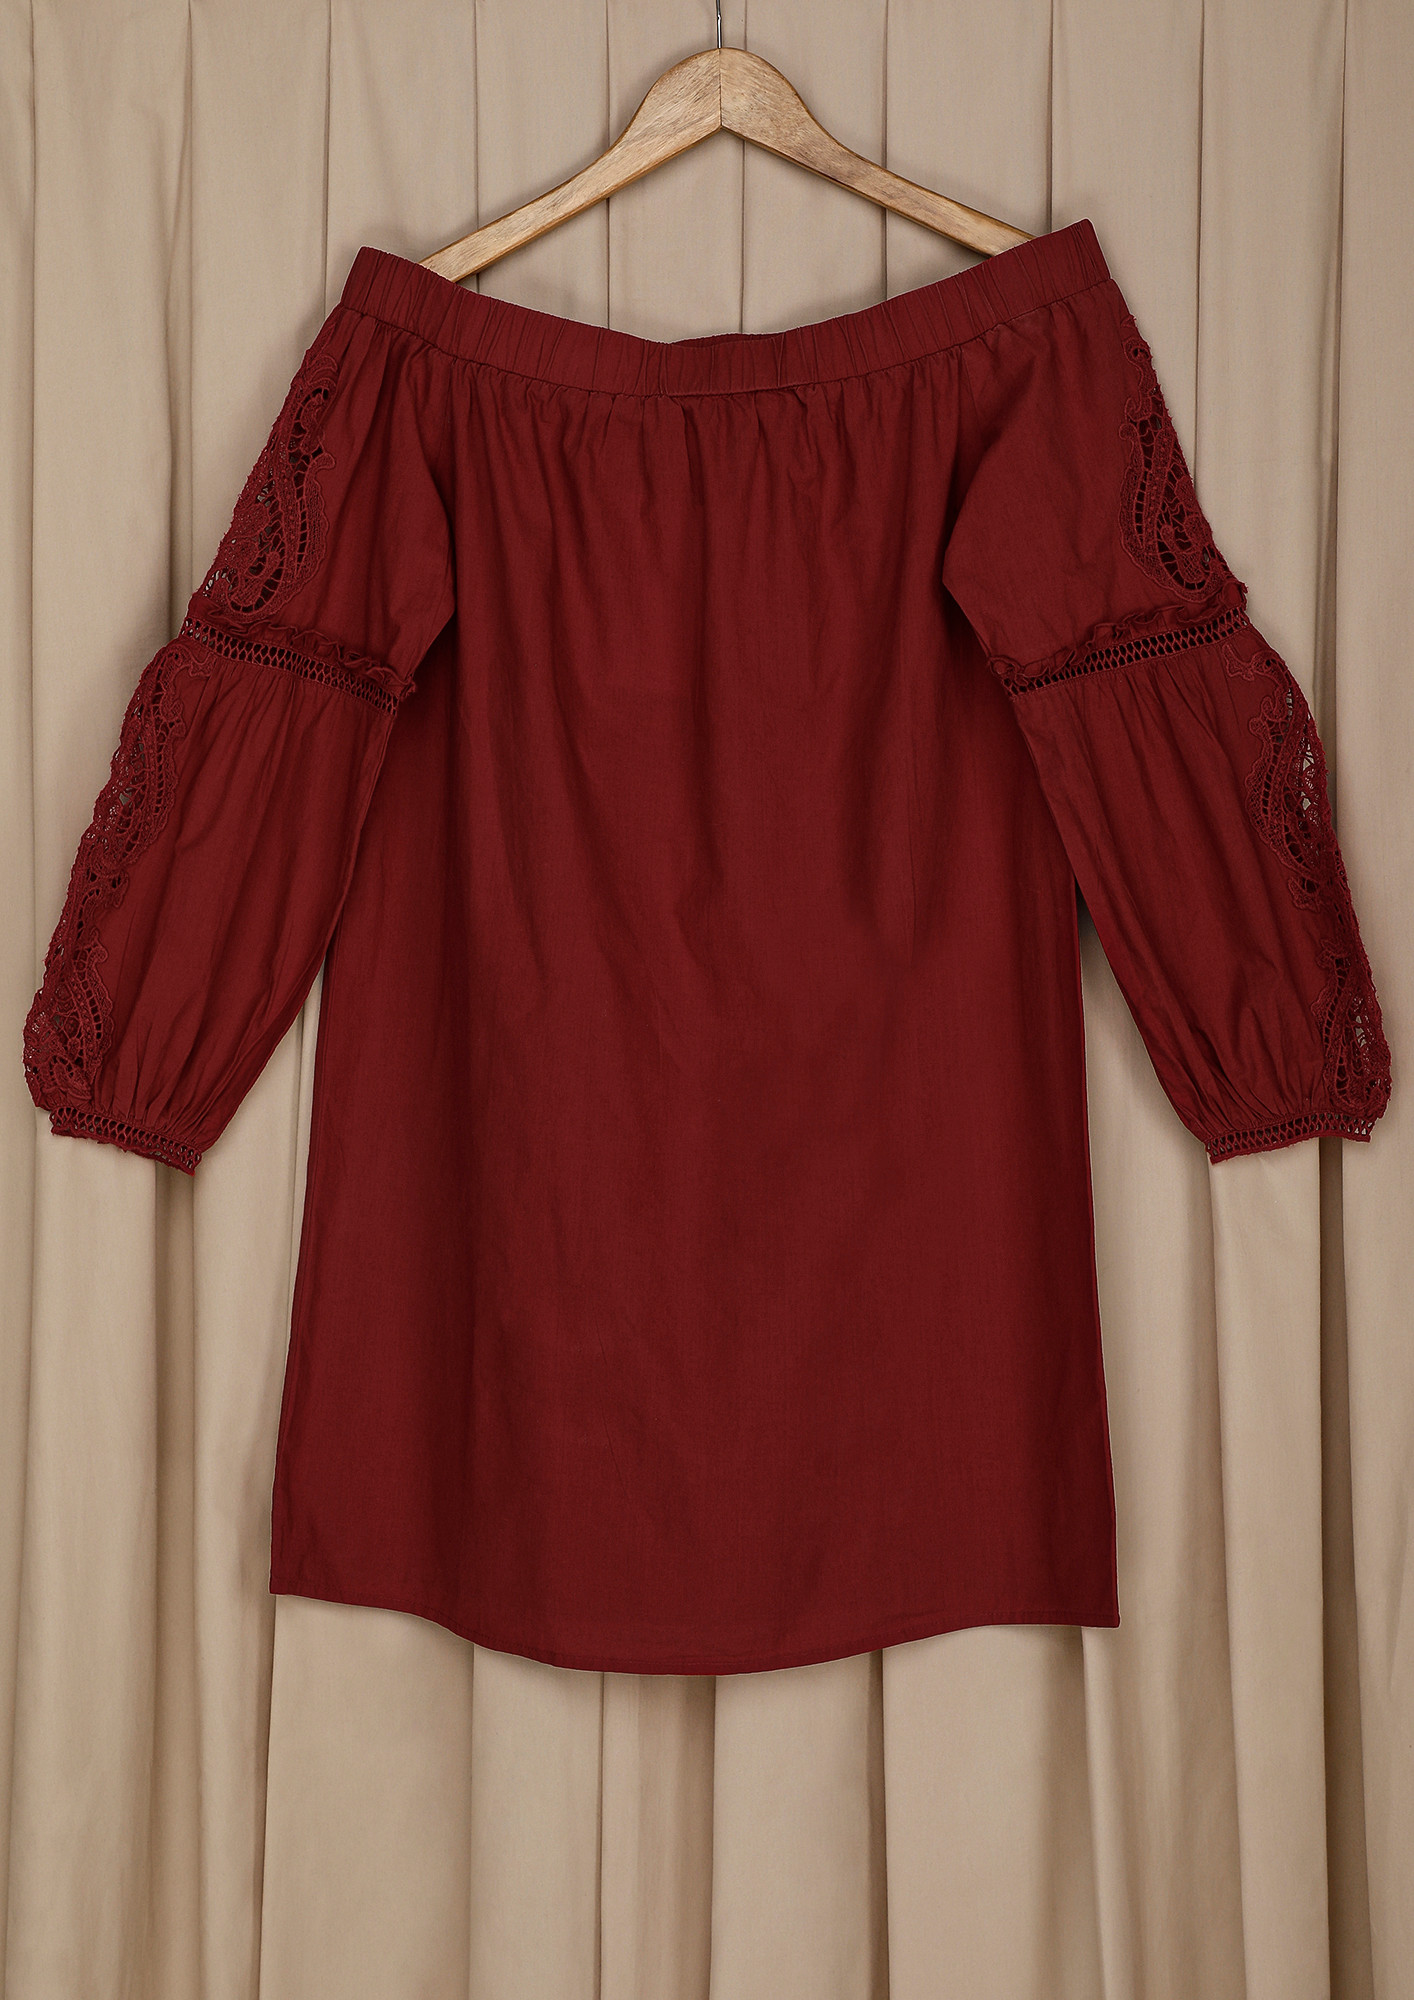 HOLLOW-OUT SLEEVE DETAIL RED TUNIC TOP